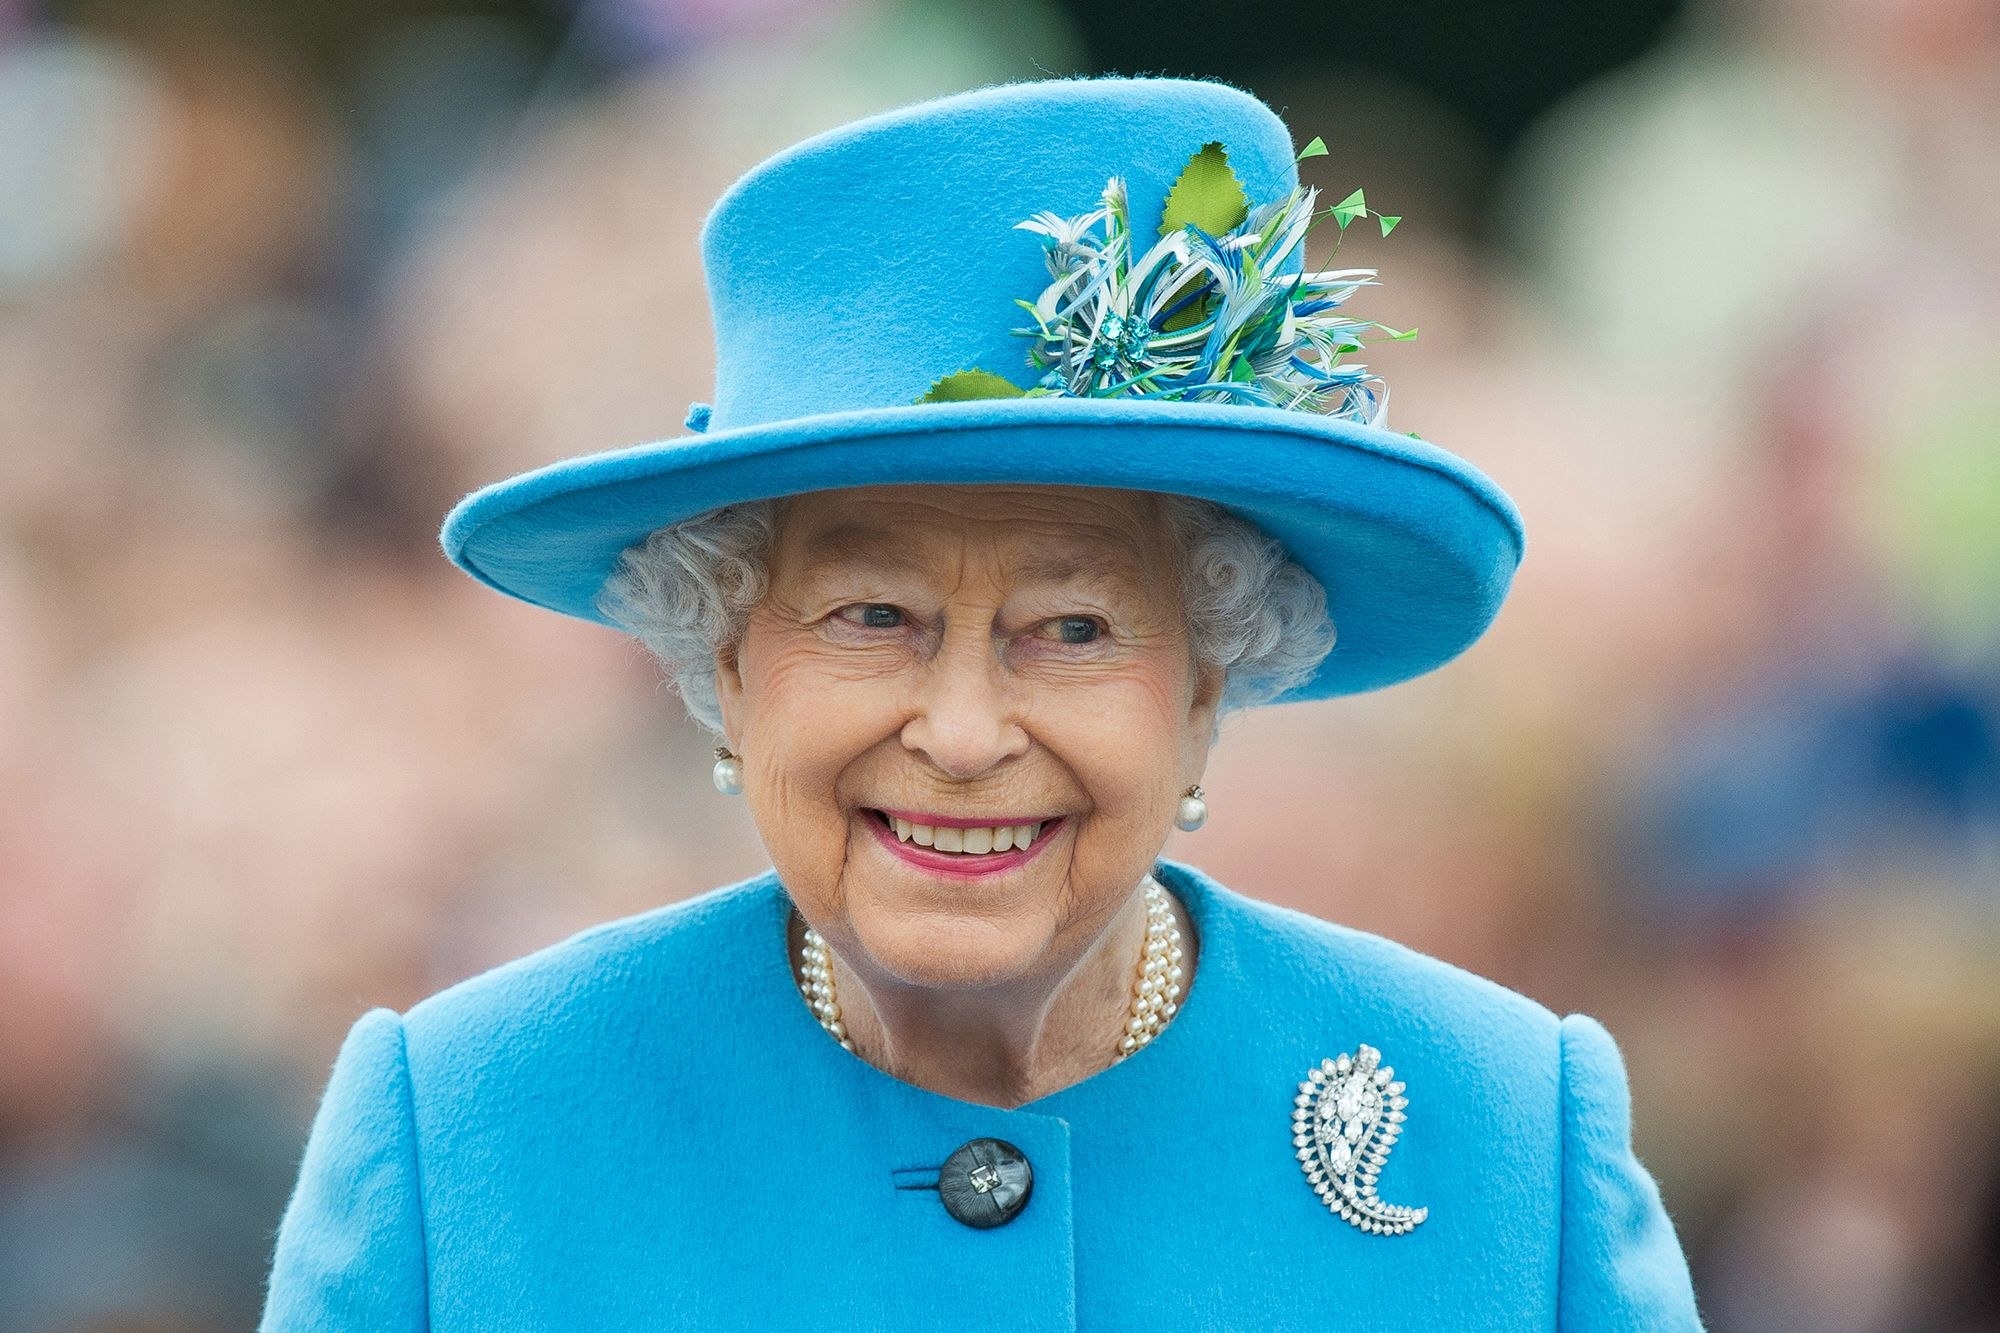 queen looking very happy and wearing an ugly broach